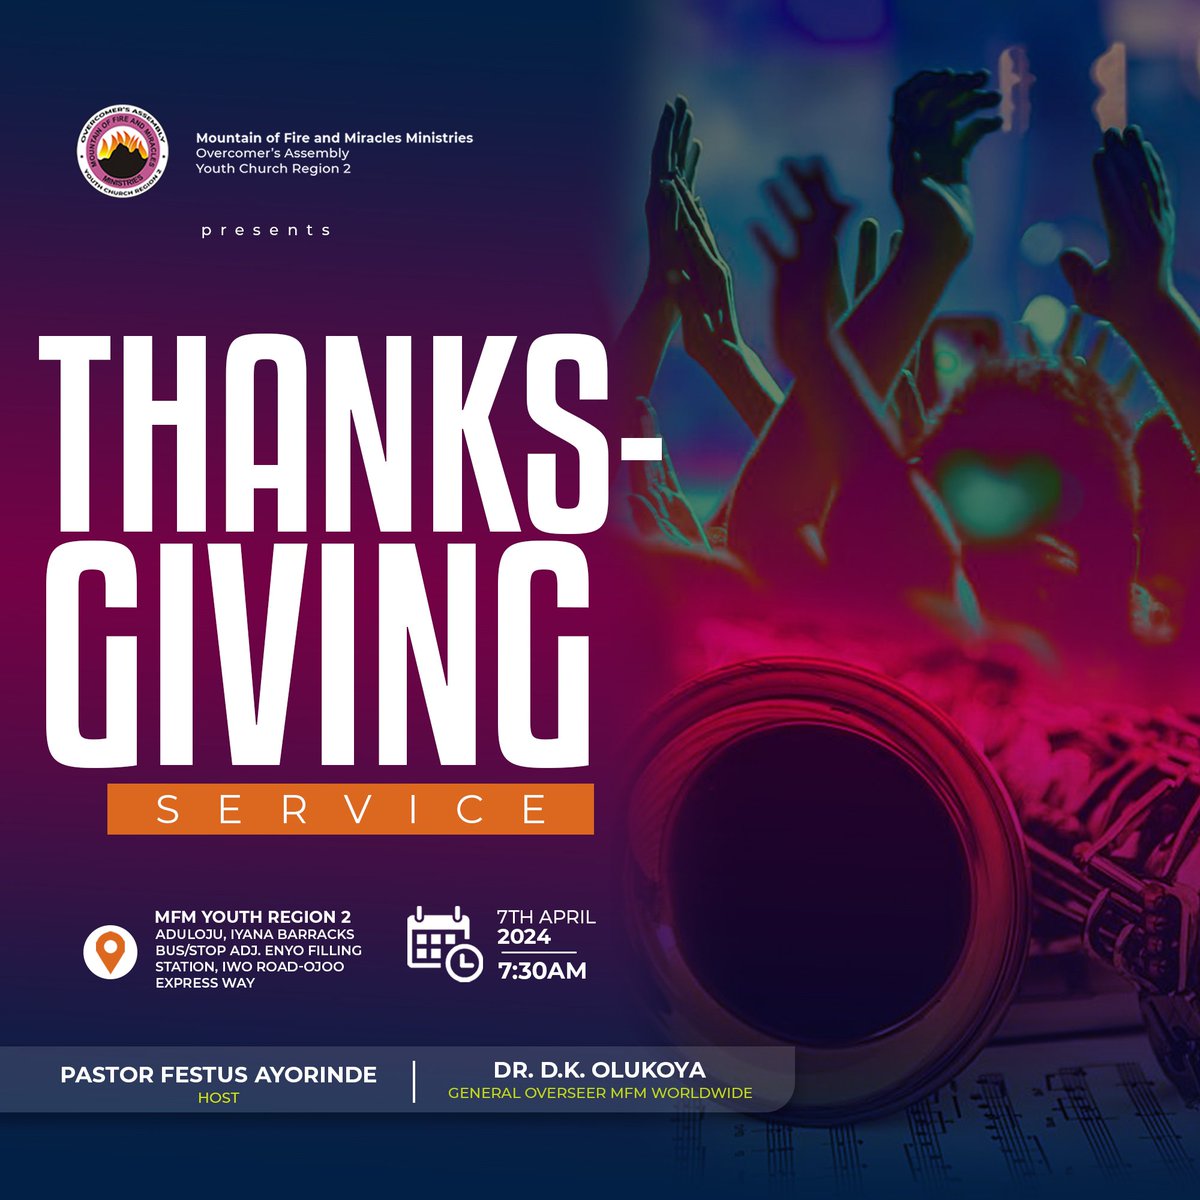 Psalm 136:1 KJV [1] O give thanks unto the LORD; for he is good: For his mercy endureth for ever. Join us tomorrow for another Moment of Intense Thanksgiving to the Lord. Invite as many as you can because In a multitude of people is a king's honor. #OVERCOMERSASSEMB